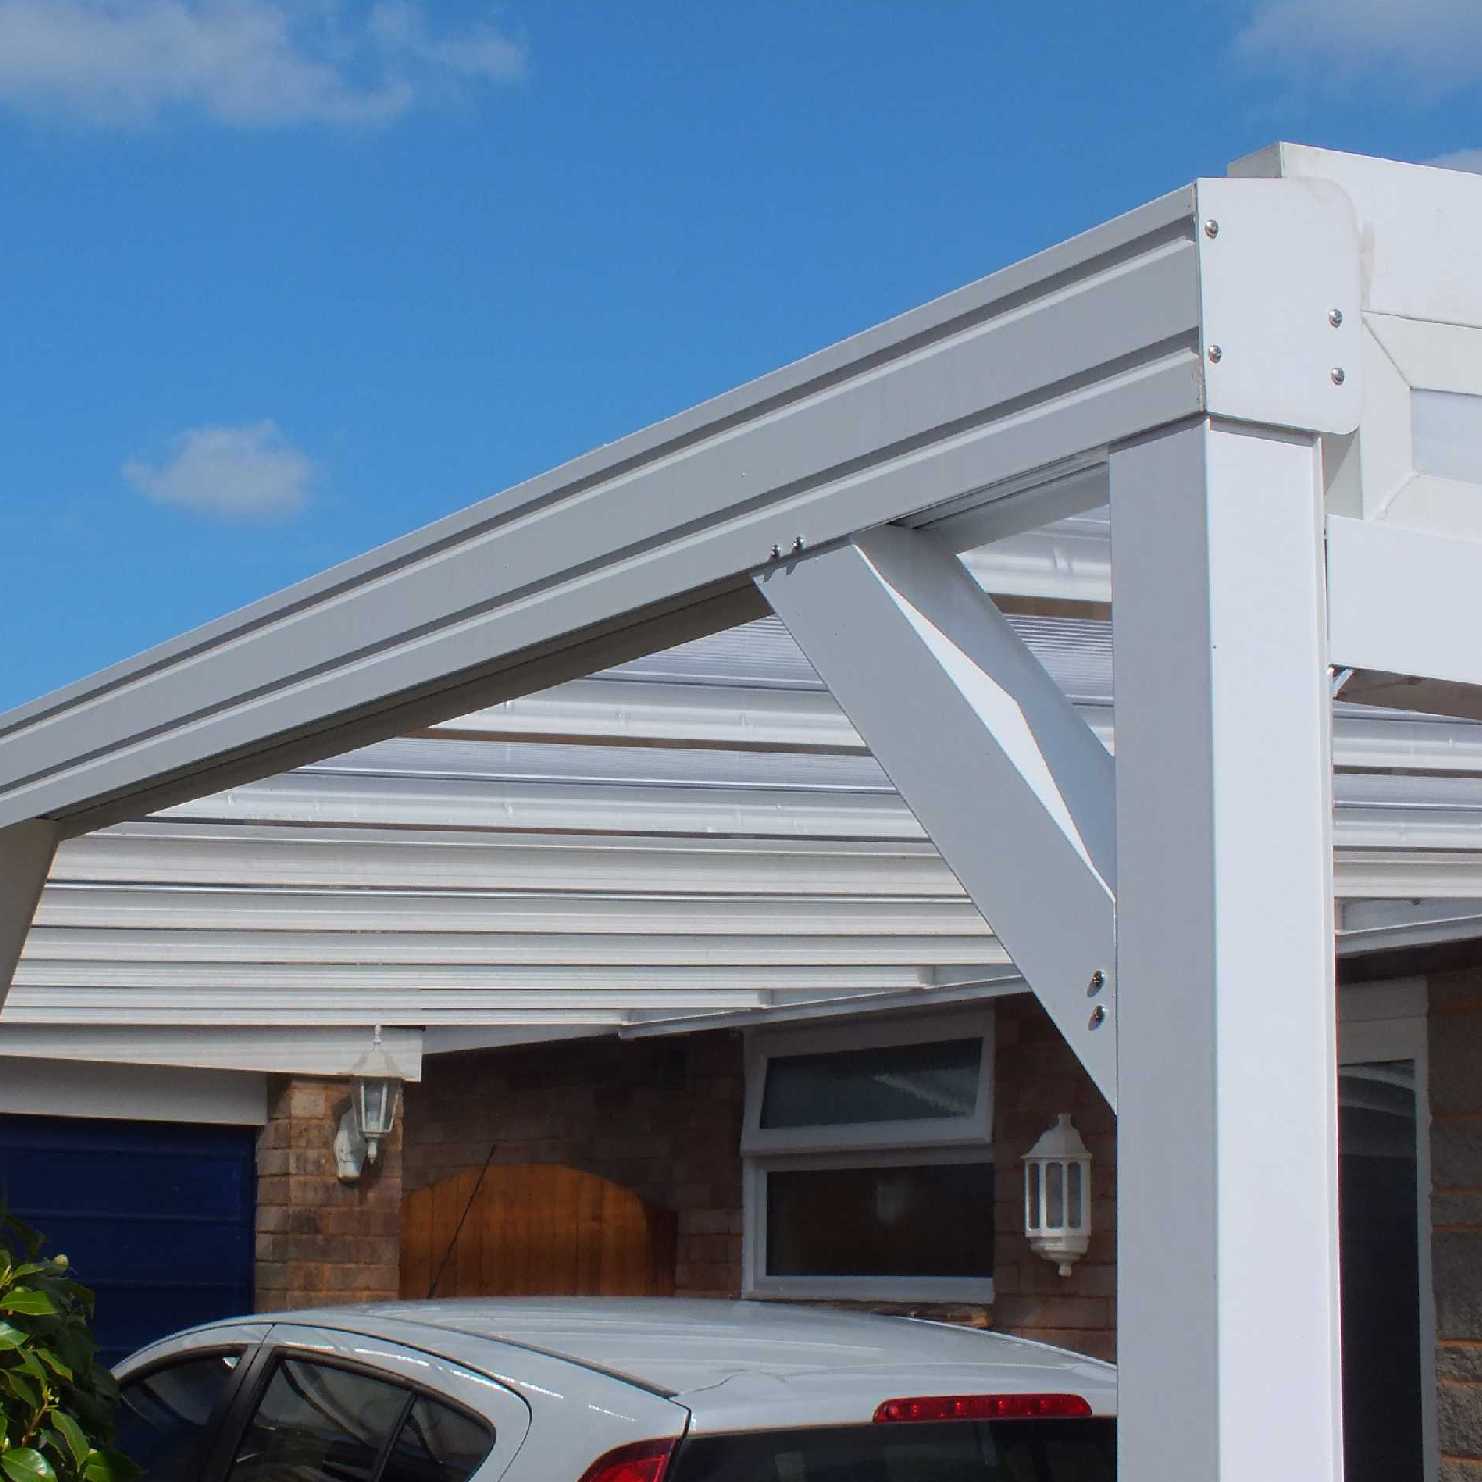 Buy Omega Smart Lean-To Canopy, White with 16mm Polycarbonate Glazing - 3.5m (W) x 3.5m (P), (3) Supporting Posts online today